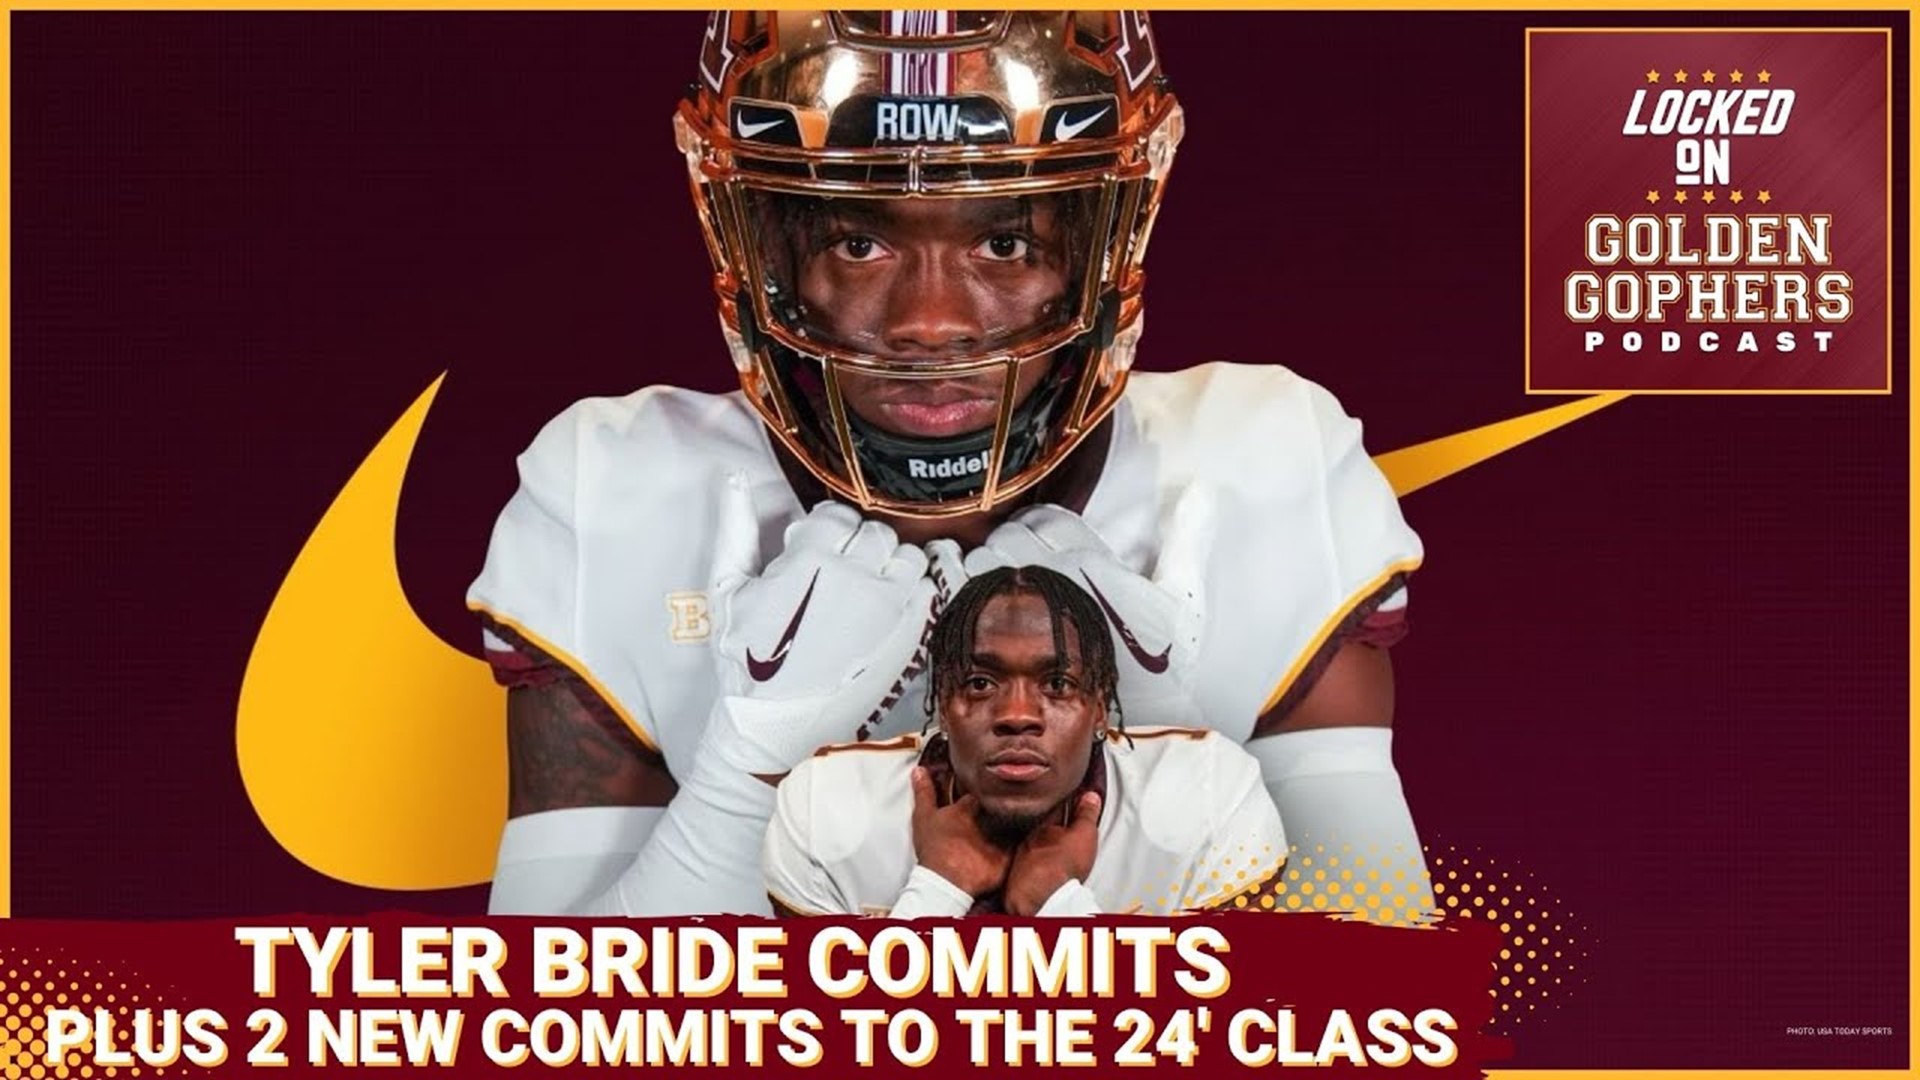 Minnesota Gophers Football A Busy Weekend For the Gophers With Tyler Bride and 2 New 24 Commits ksdk